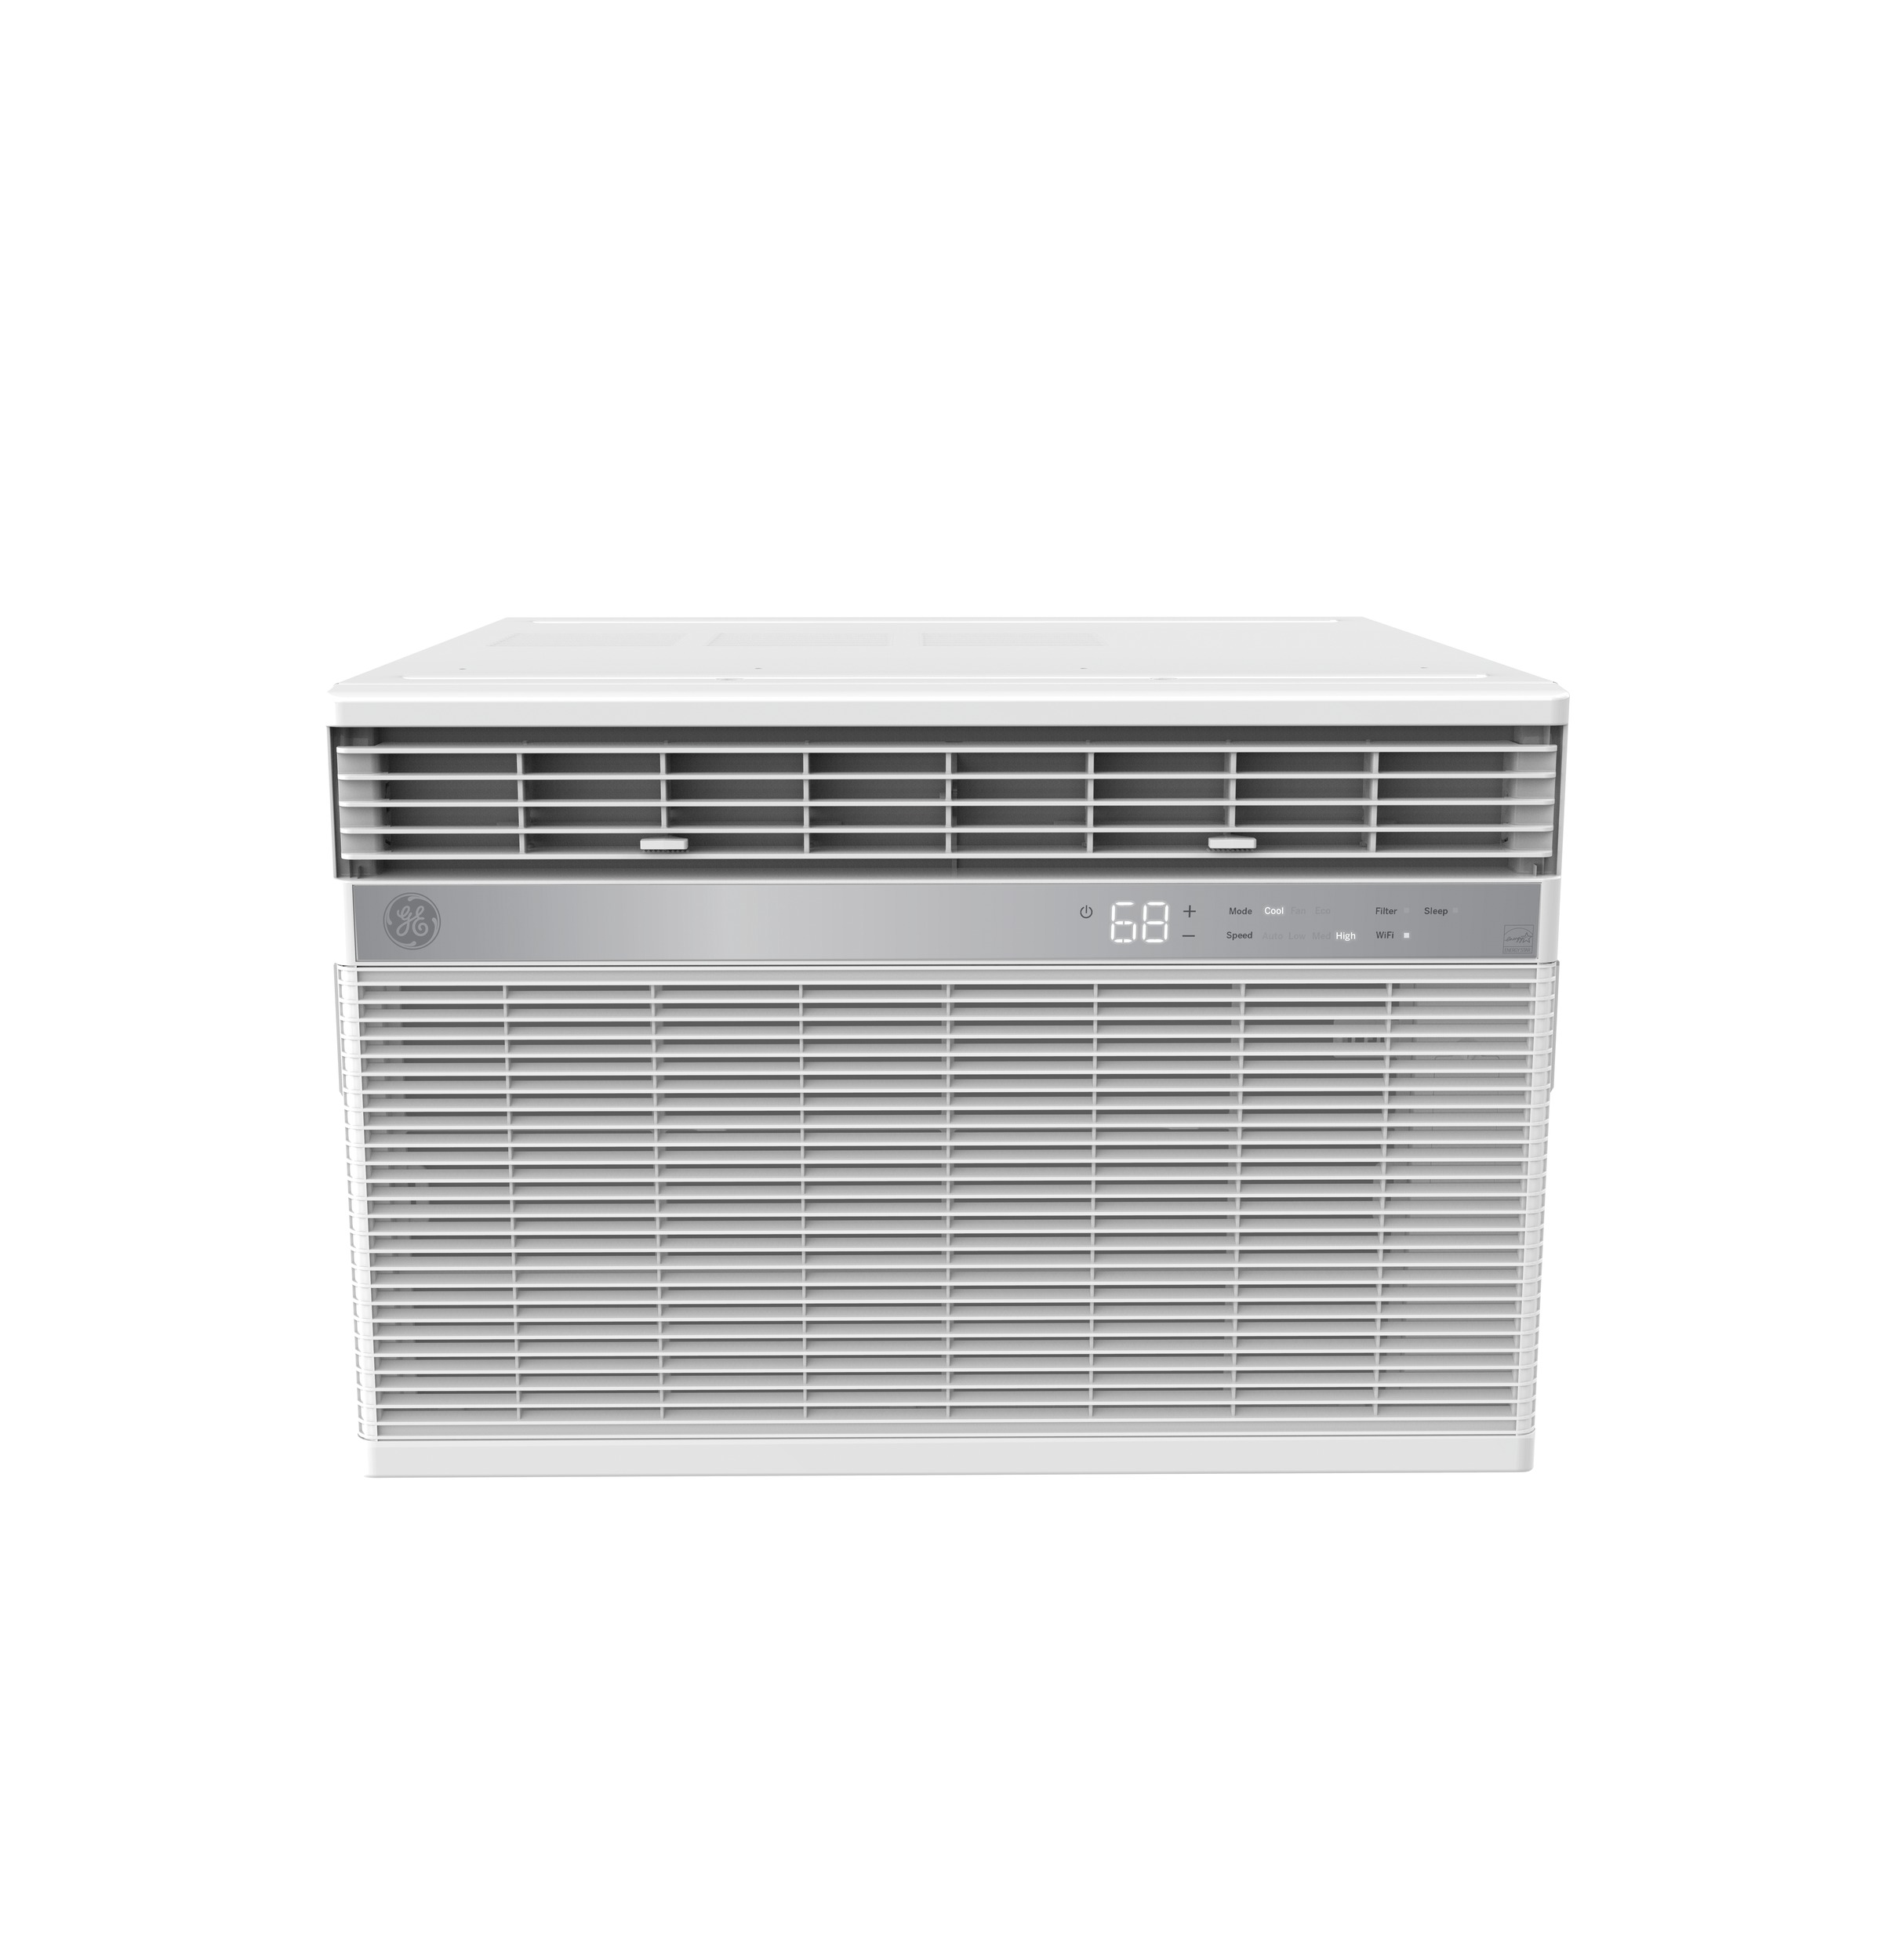 GE® ENERGY STAR® 24,000 BTU Smart Electronic Window Air Conditioner for Extra-Large Rooms up to 1500 sq. ft.